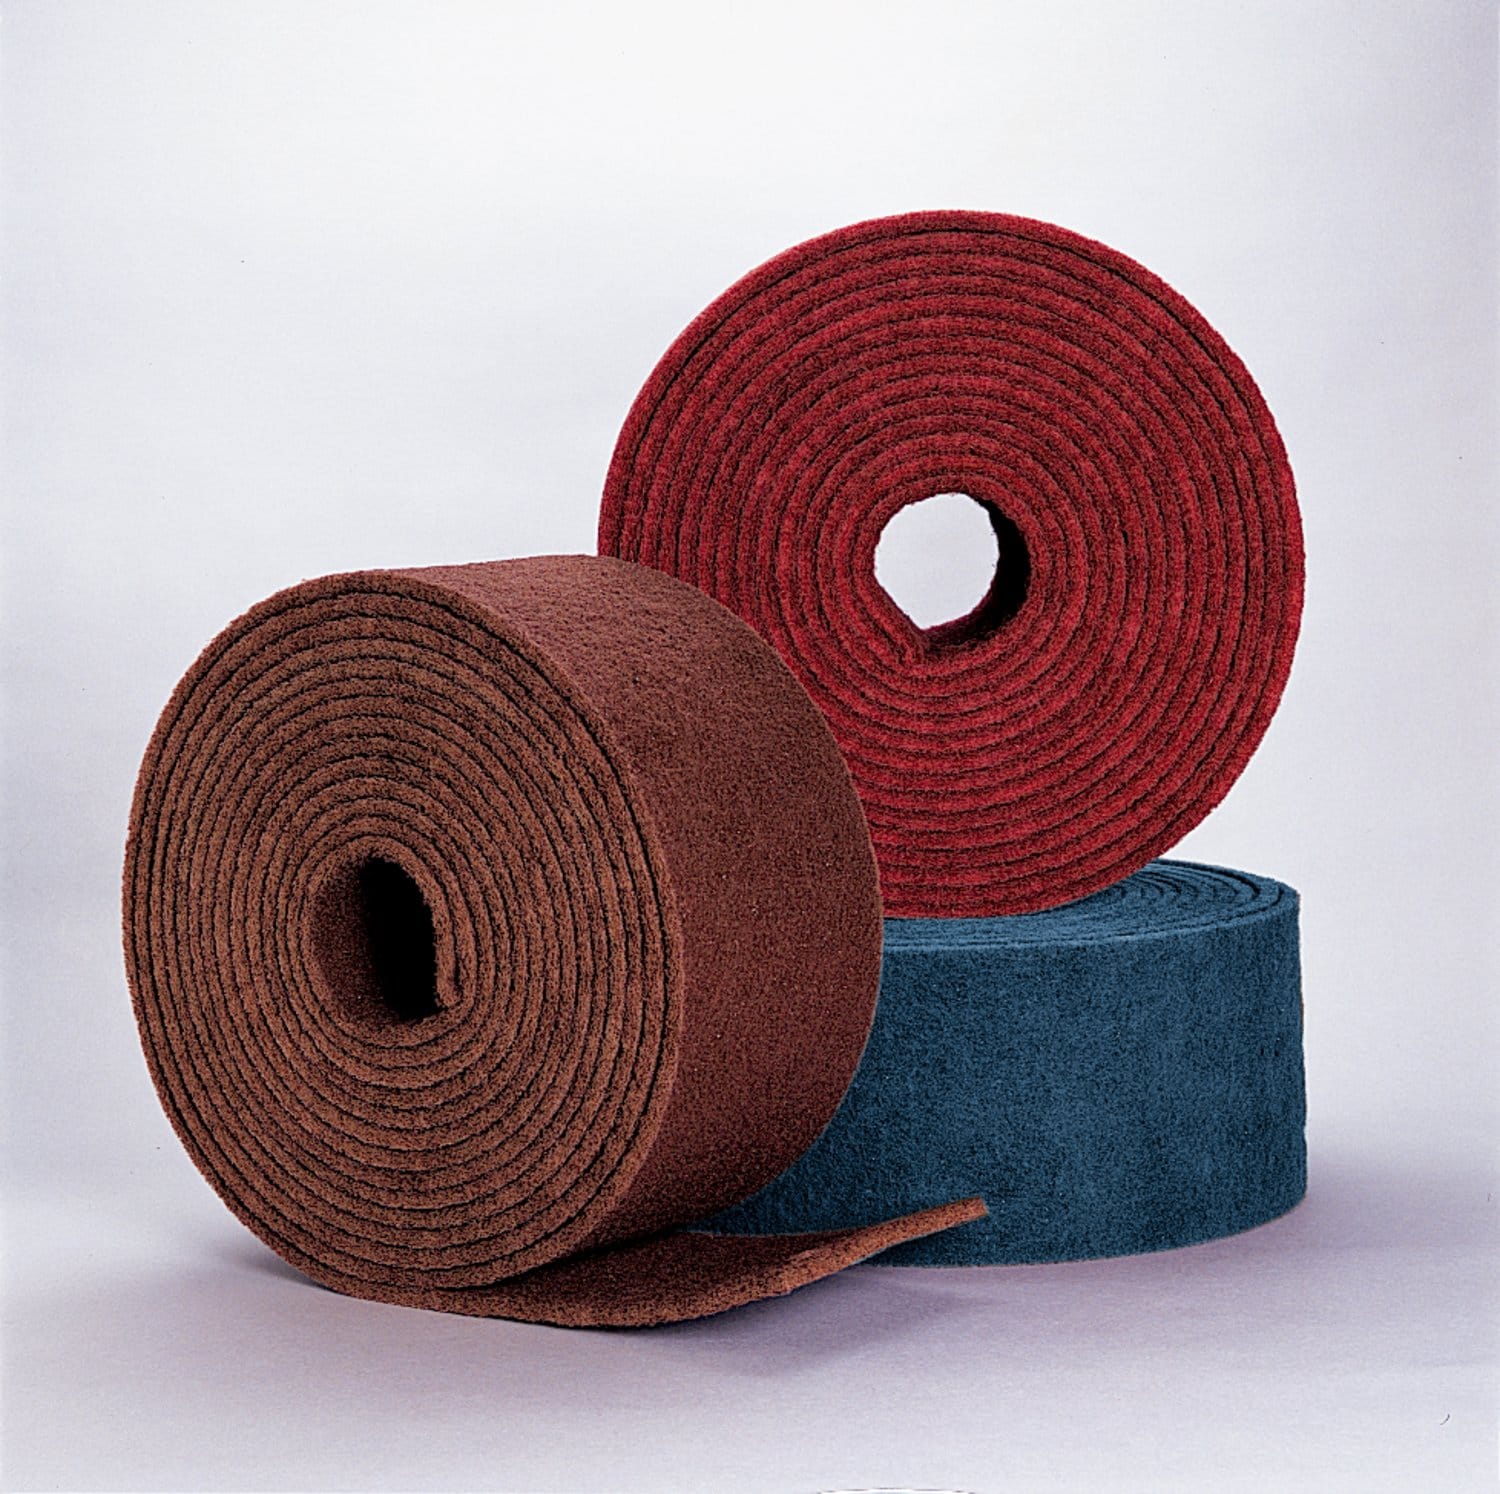 7010301215 - Standard Abrasives S/C Buff and Blend GP Roll 830041, 12 in x 30 ft S
VFN, 1 ea/Case